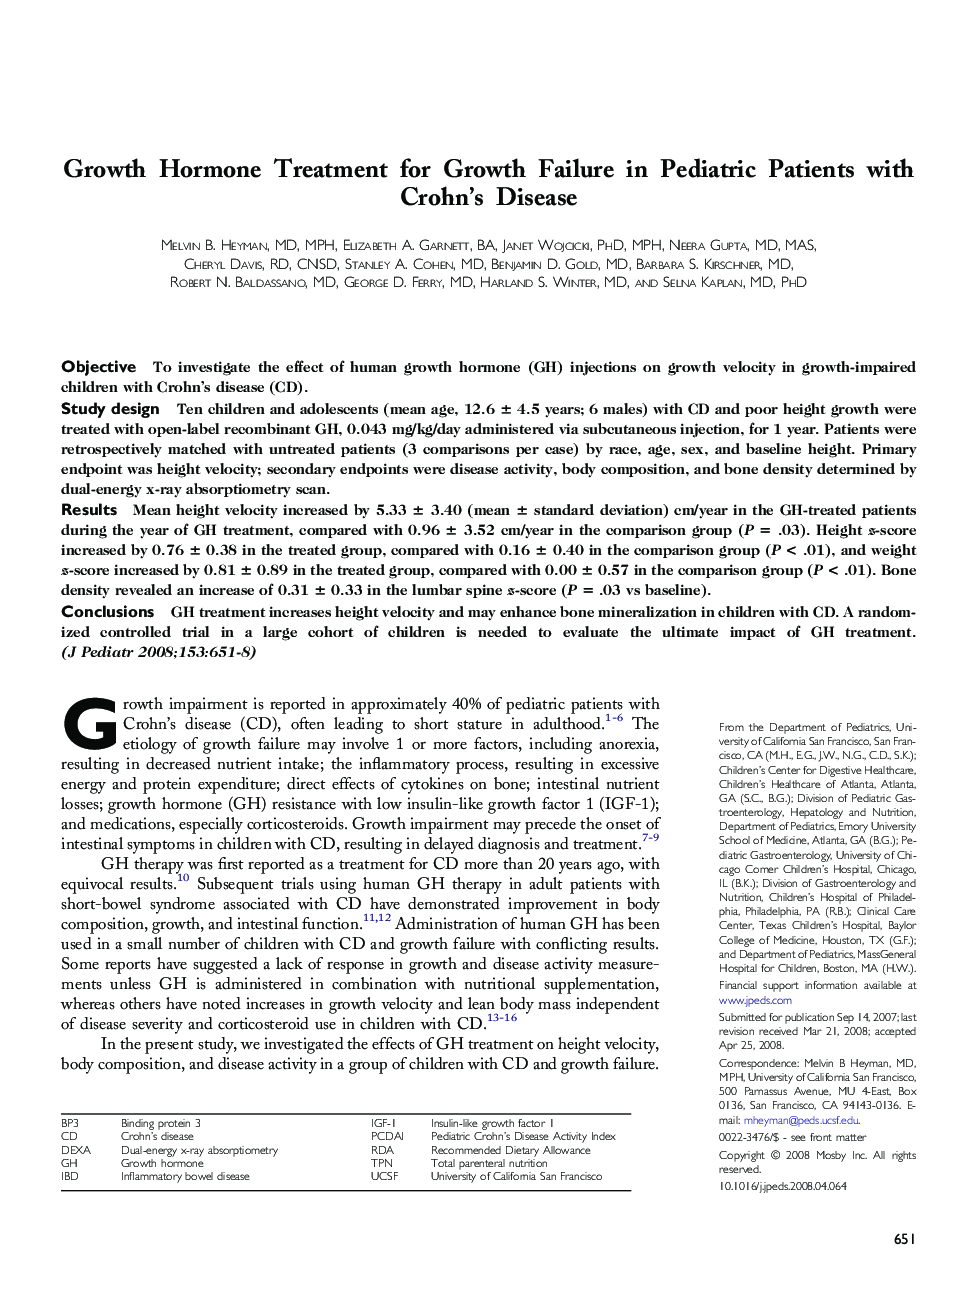 Growth Hormone Treatment for Growth Failure in Pediatric Patients with Crohn's Disease